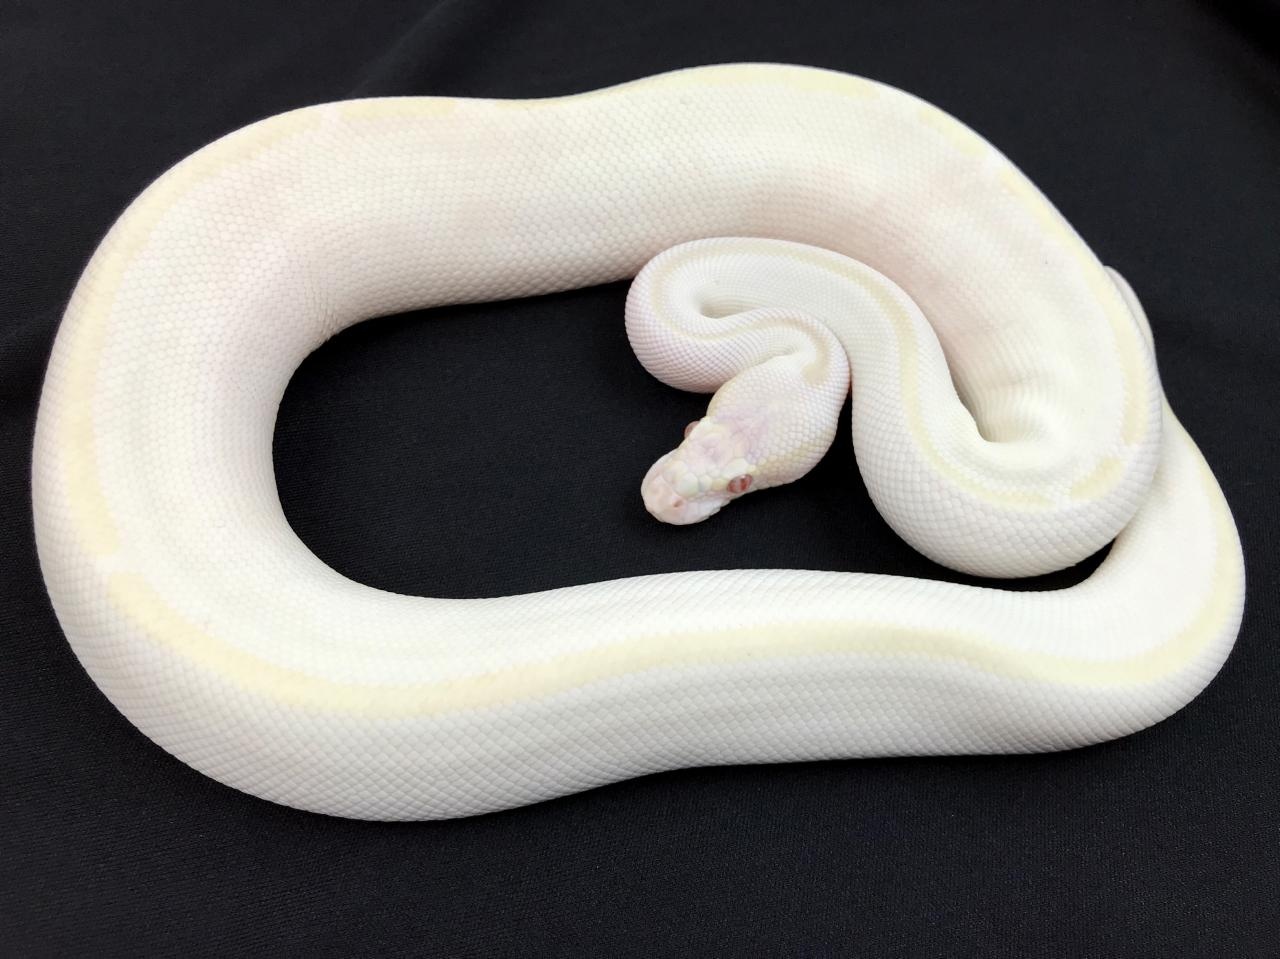 Lavender Butter Mystic Ball Python by Royal Constrictor Designs